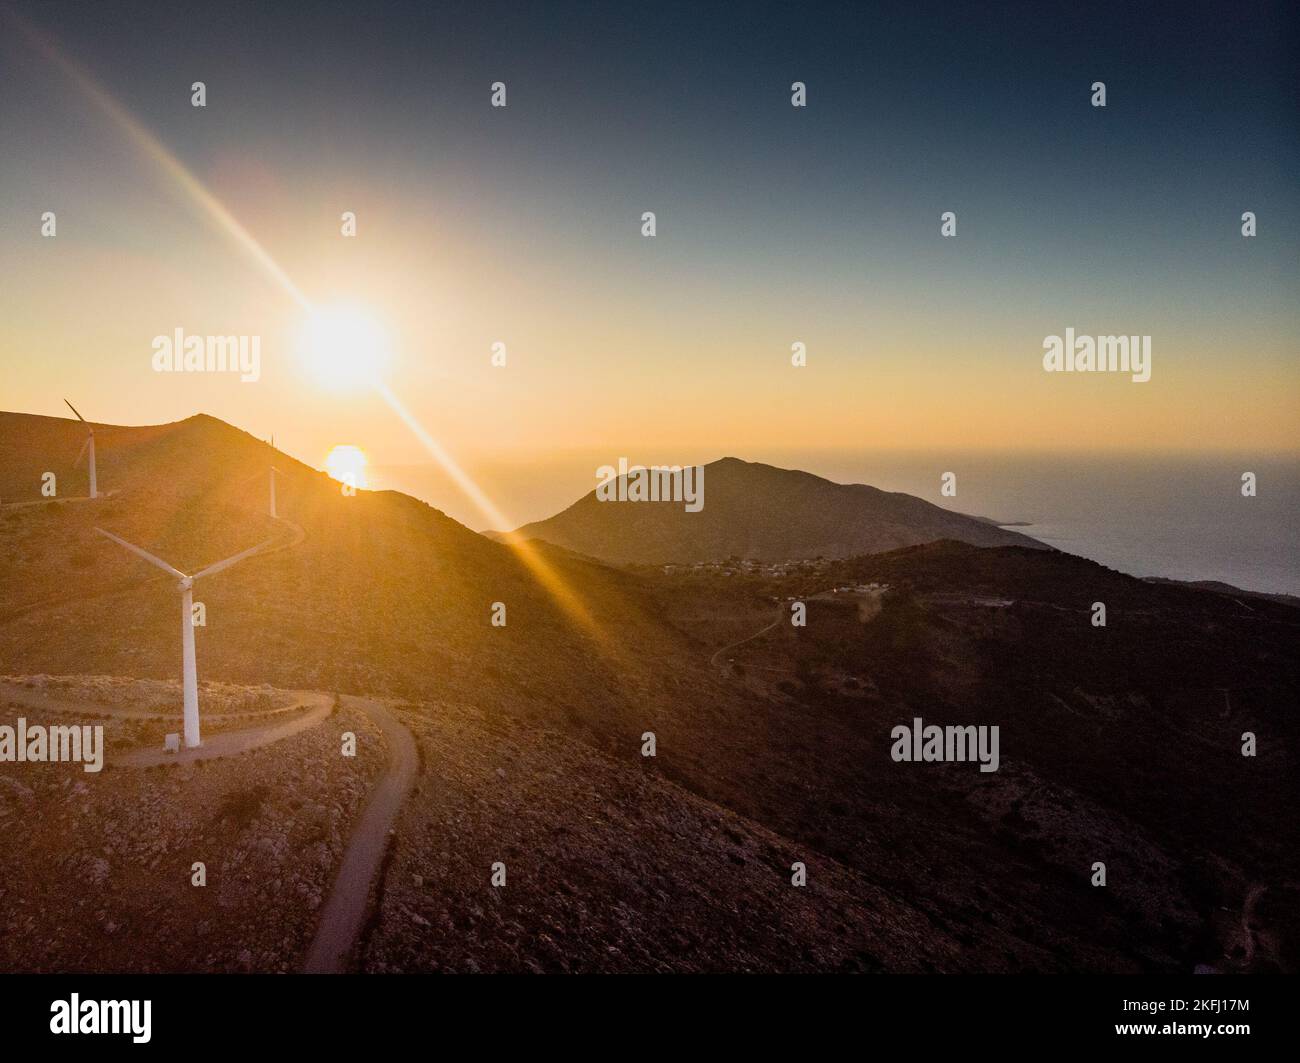 Wind turbines on mountain against sky and scenic view of silhouette ranges against bright sun during sunset Stock Photo